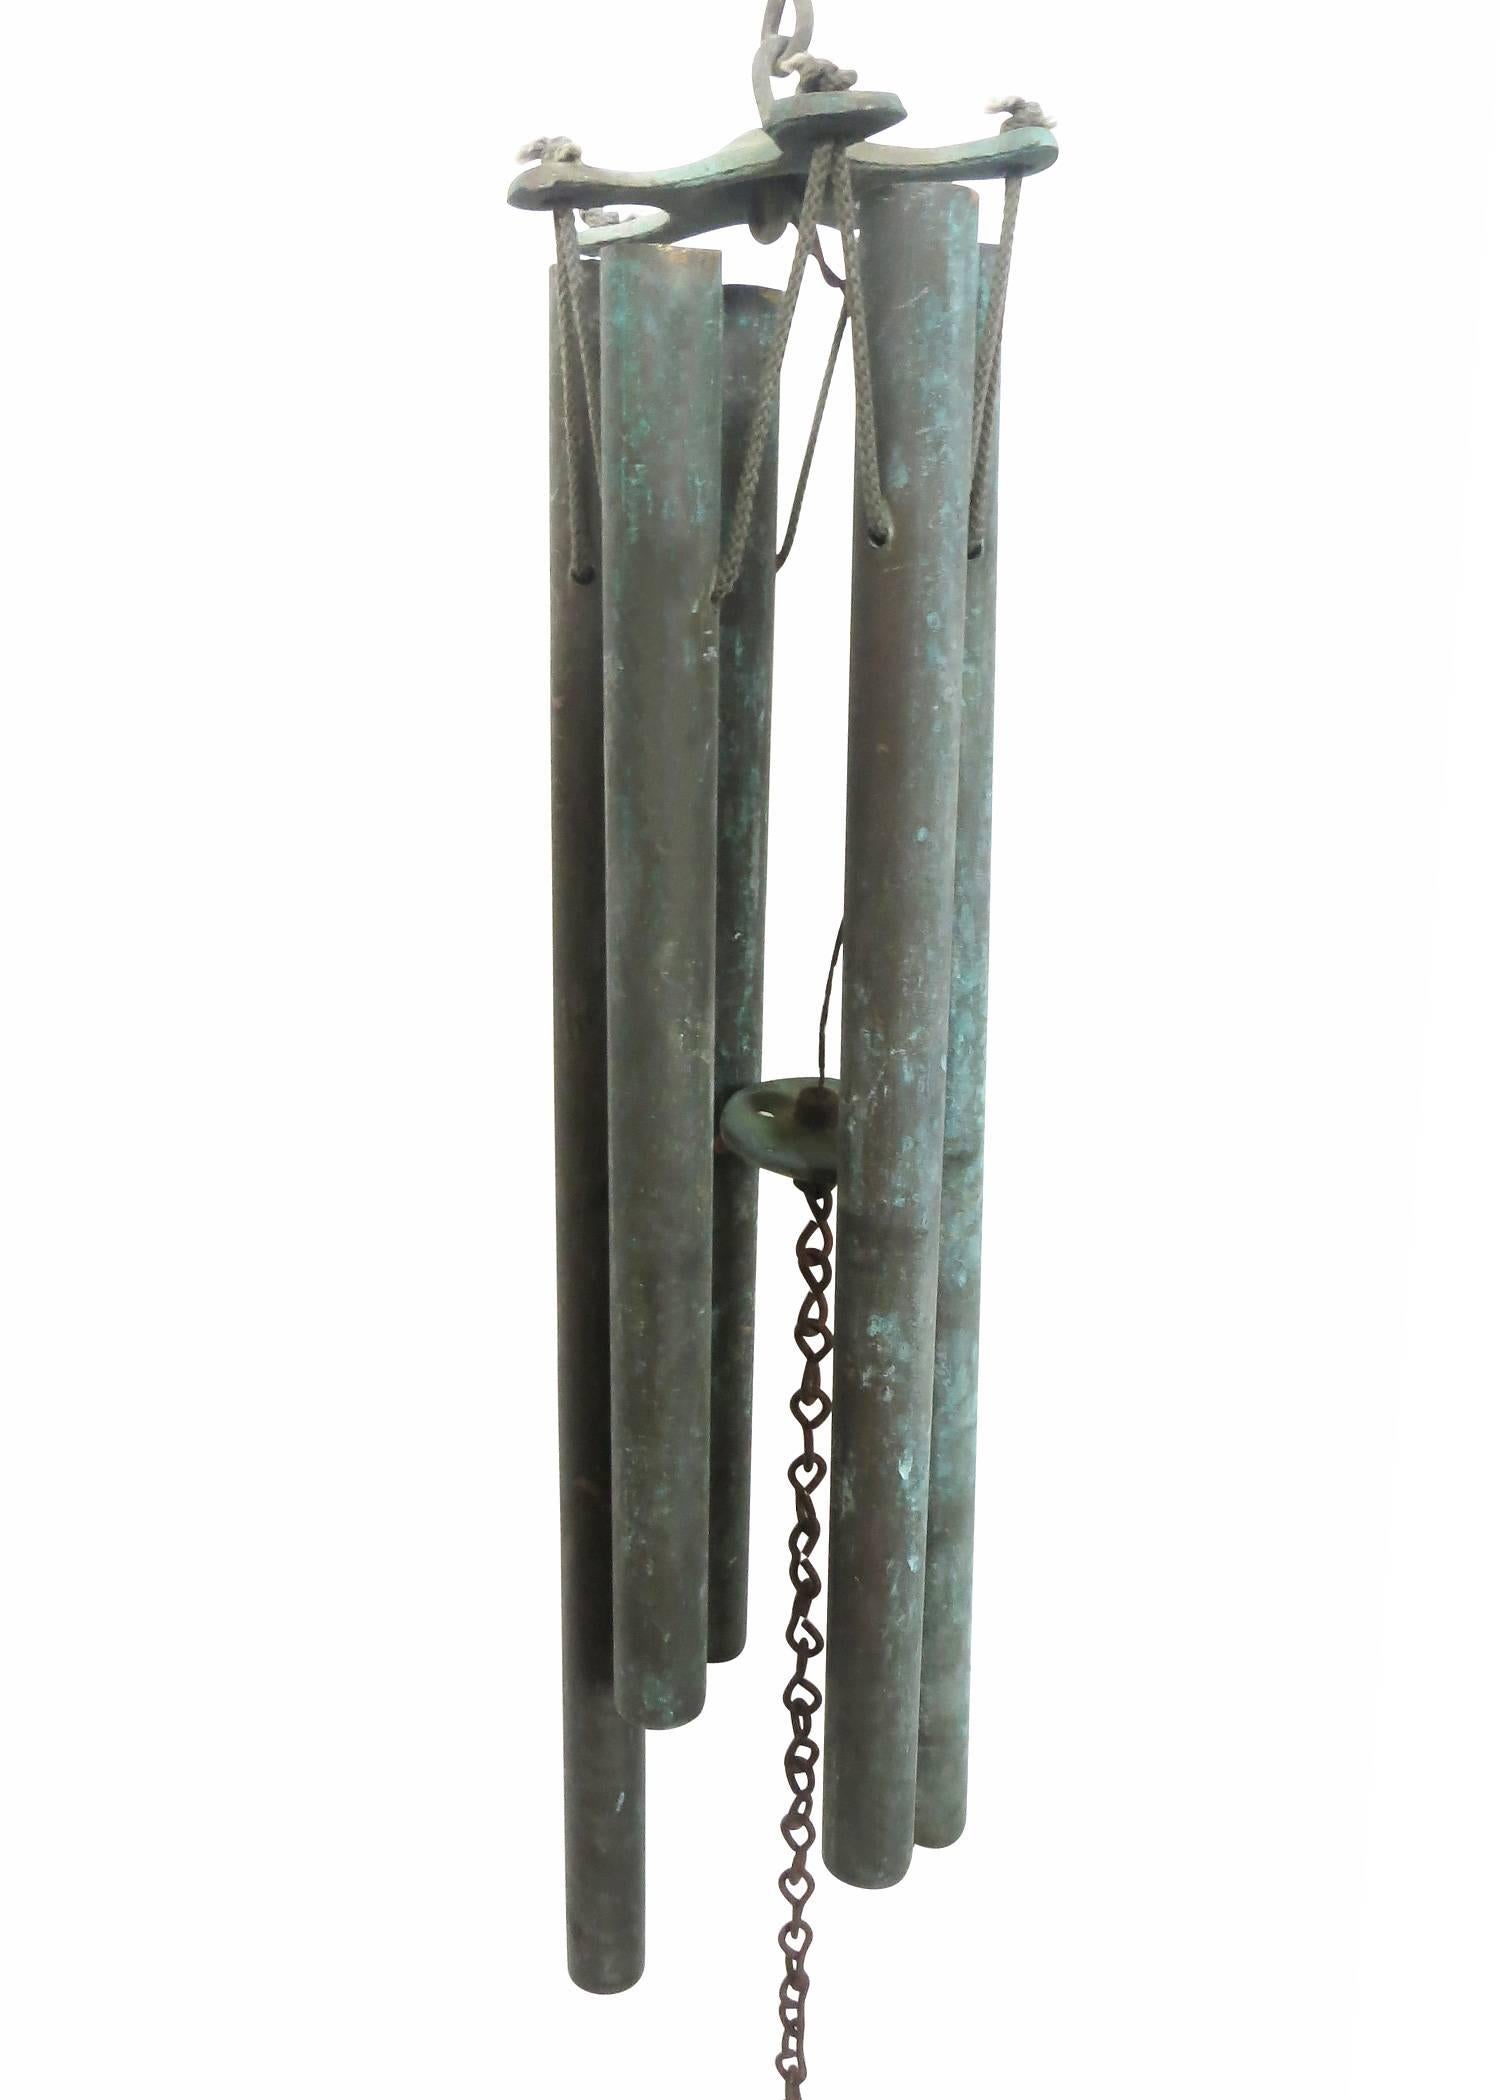 Walter Lamb attributed modernist bronze tubing and sheet bronze wind chimes with a sound similar to church bells. From the beaches of Hawaii Walter Lamb created wonderful furniture and accessories in the 1950s and 1960s. Measures: 26.5